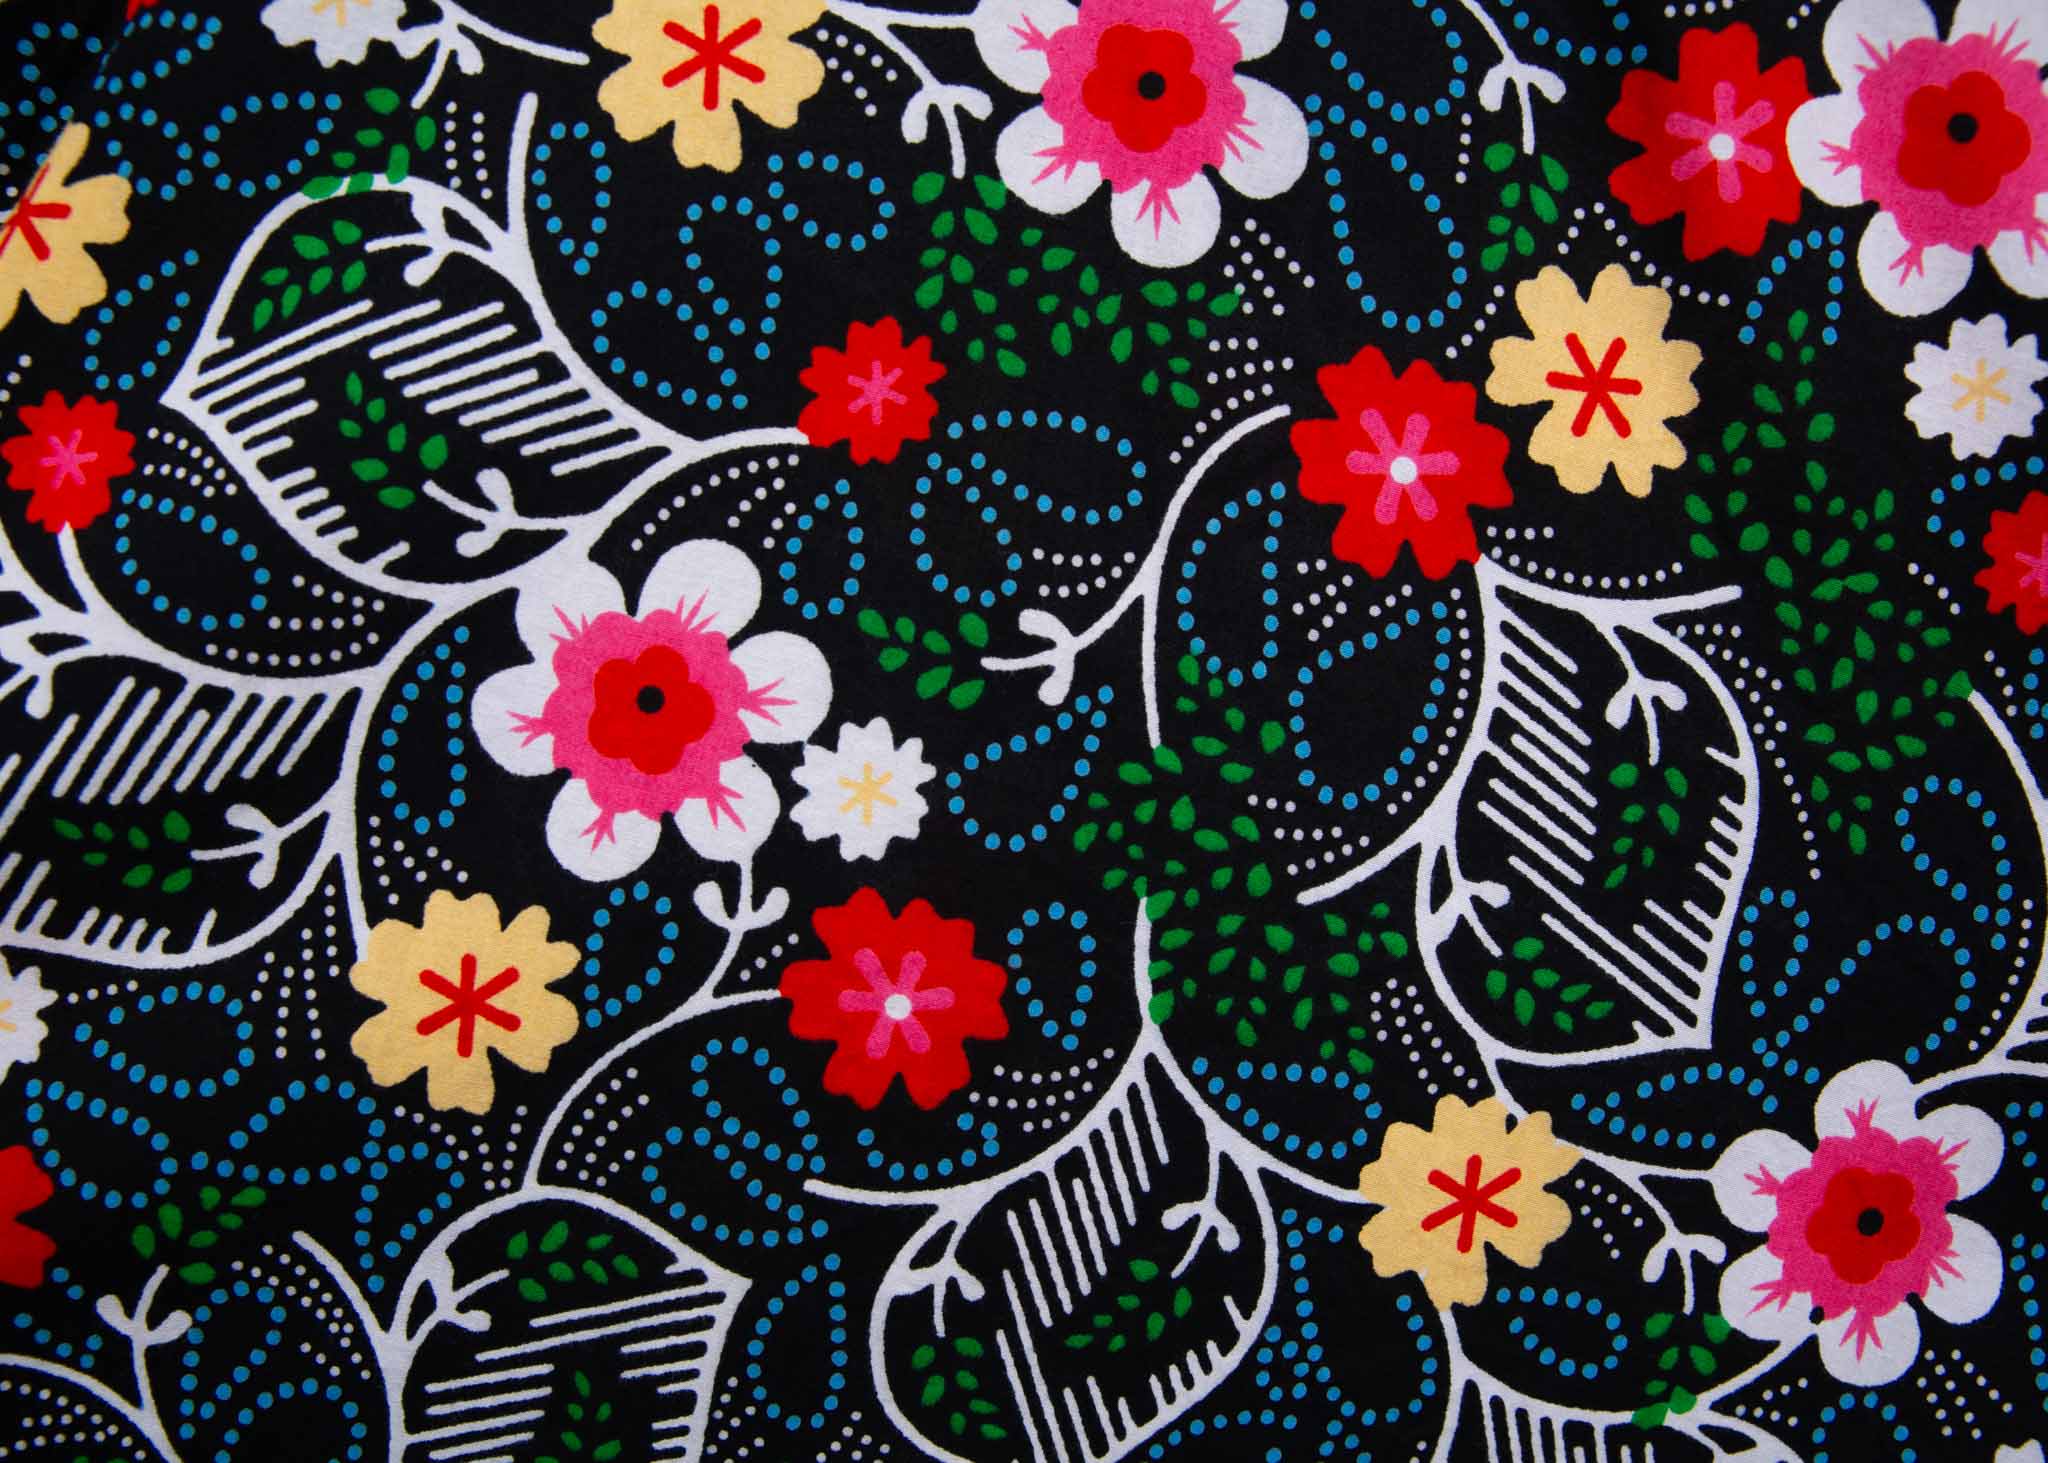 Close up display of black dress with white, green, red and yellow floral print, fabric.